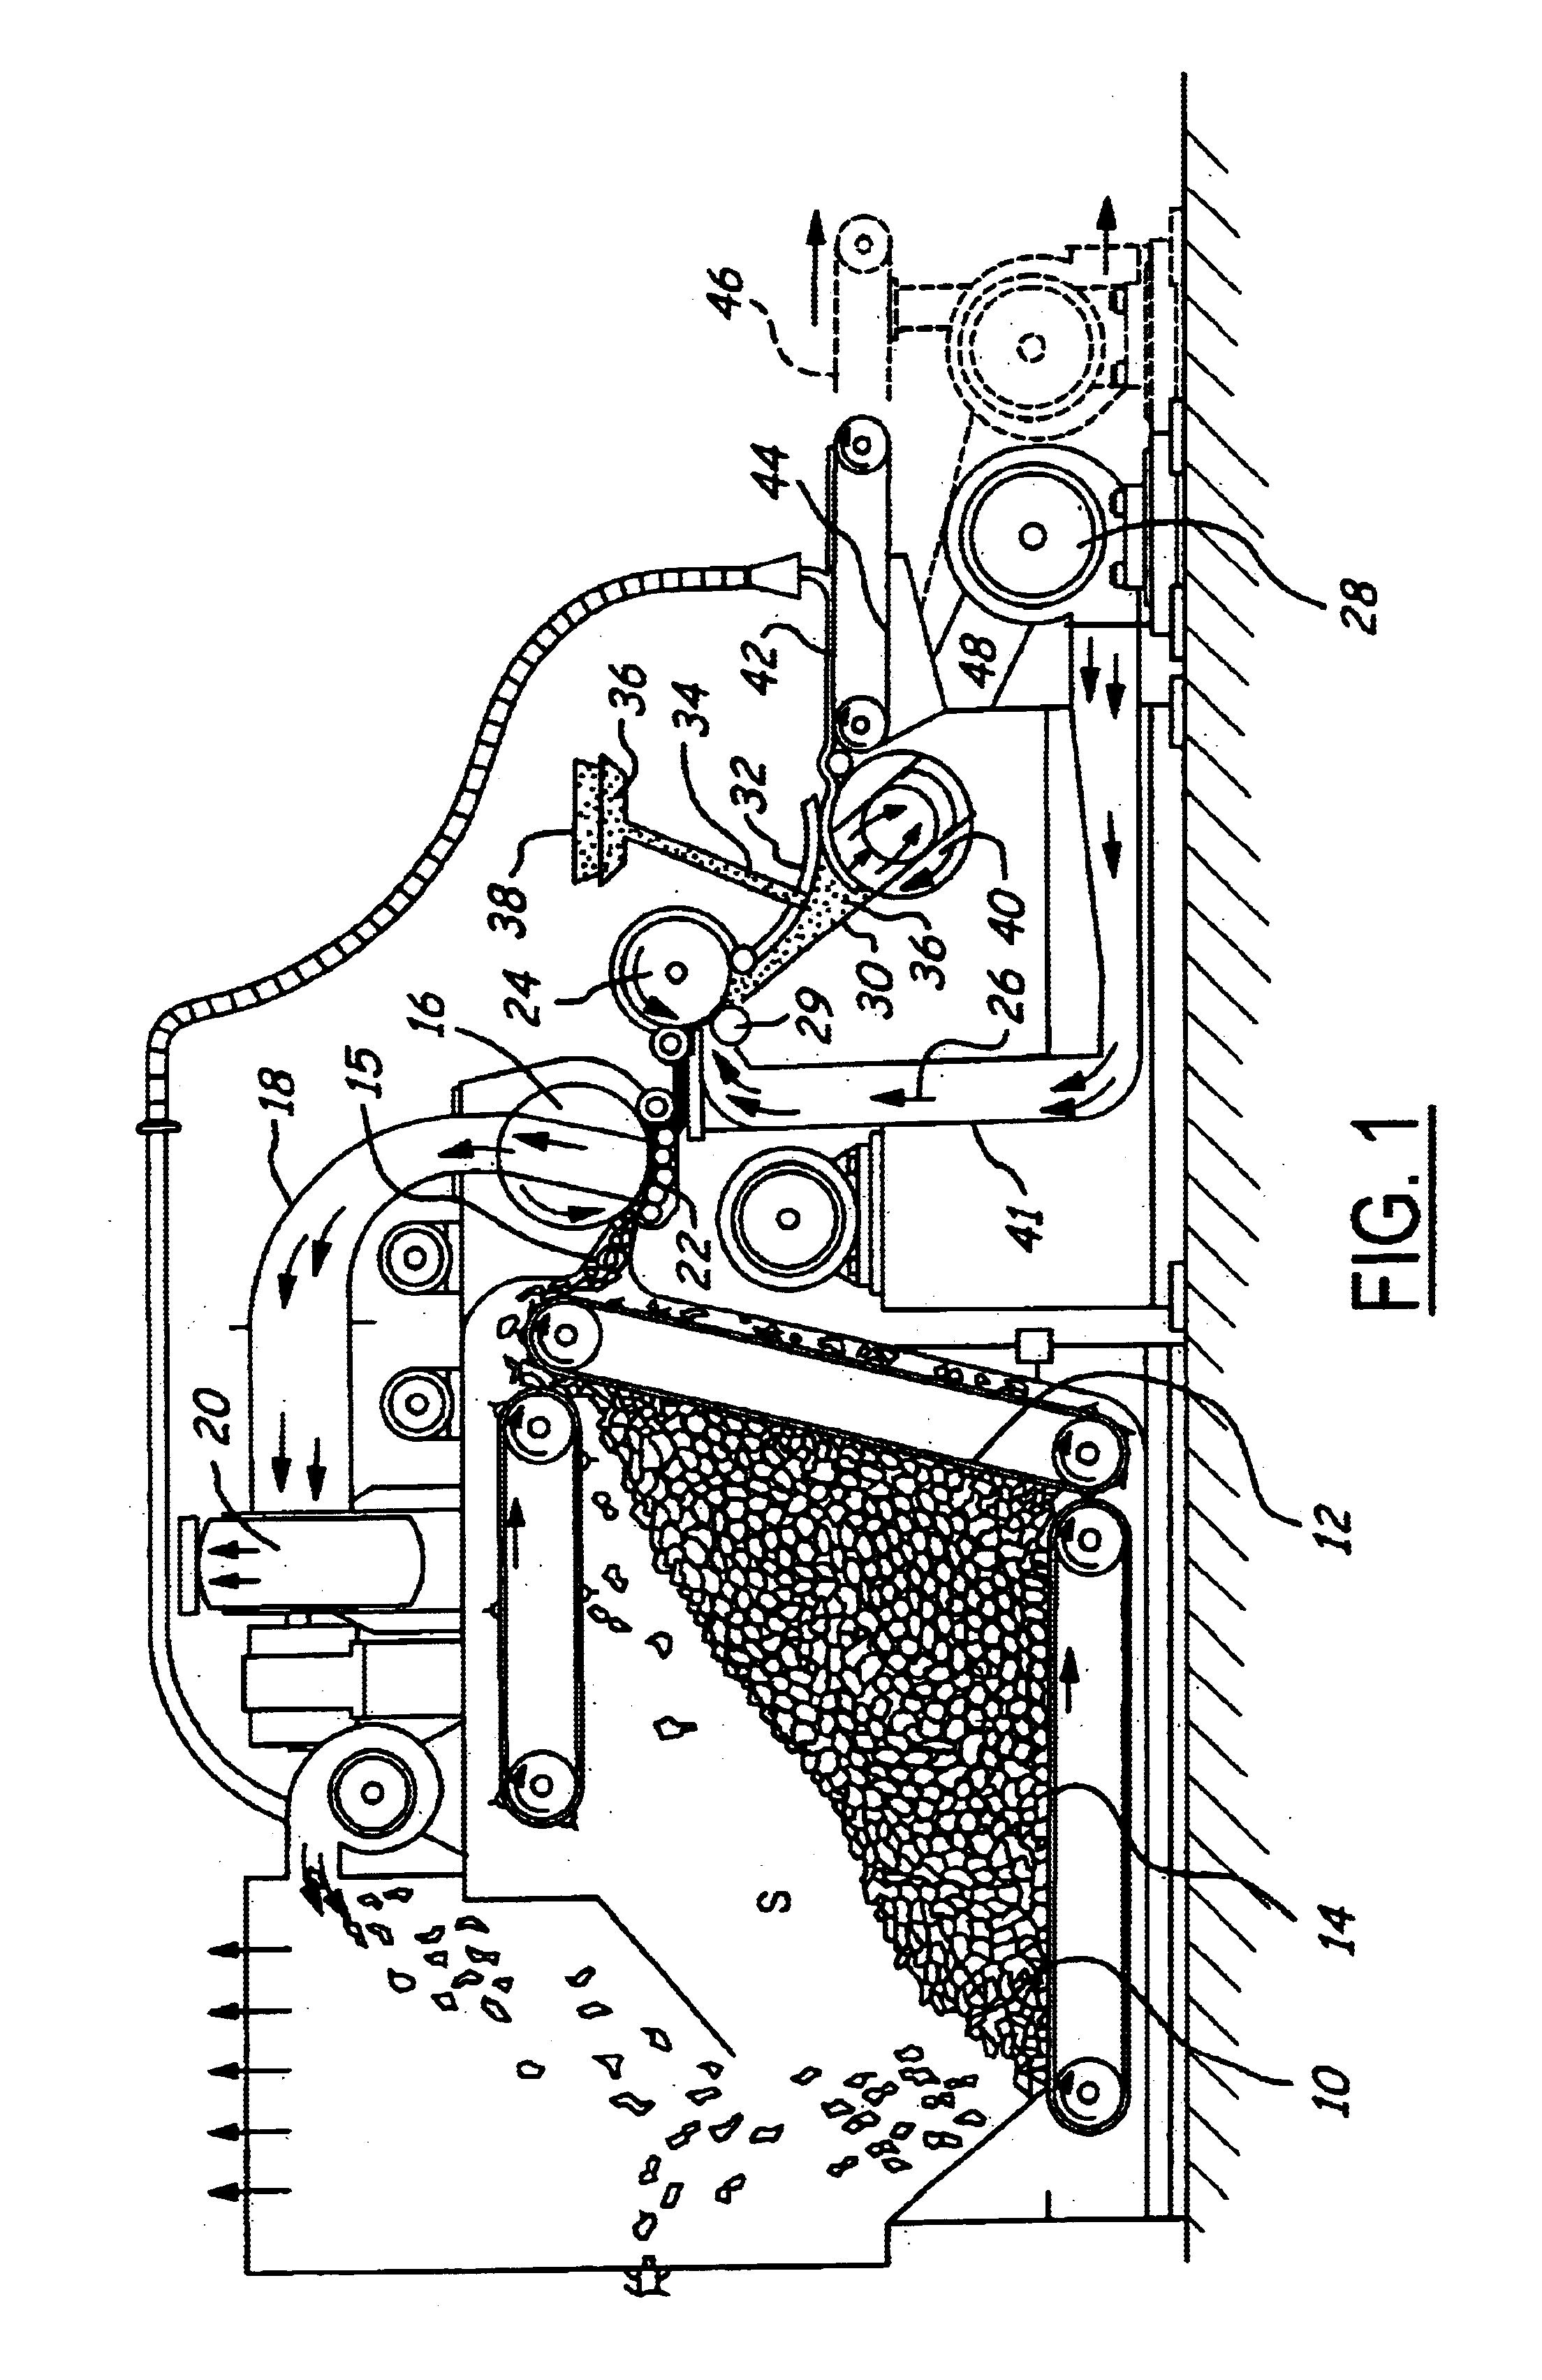 Filter material and method of making same